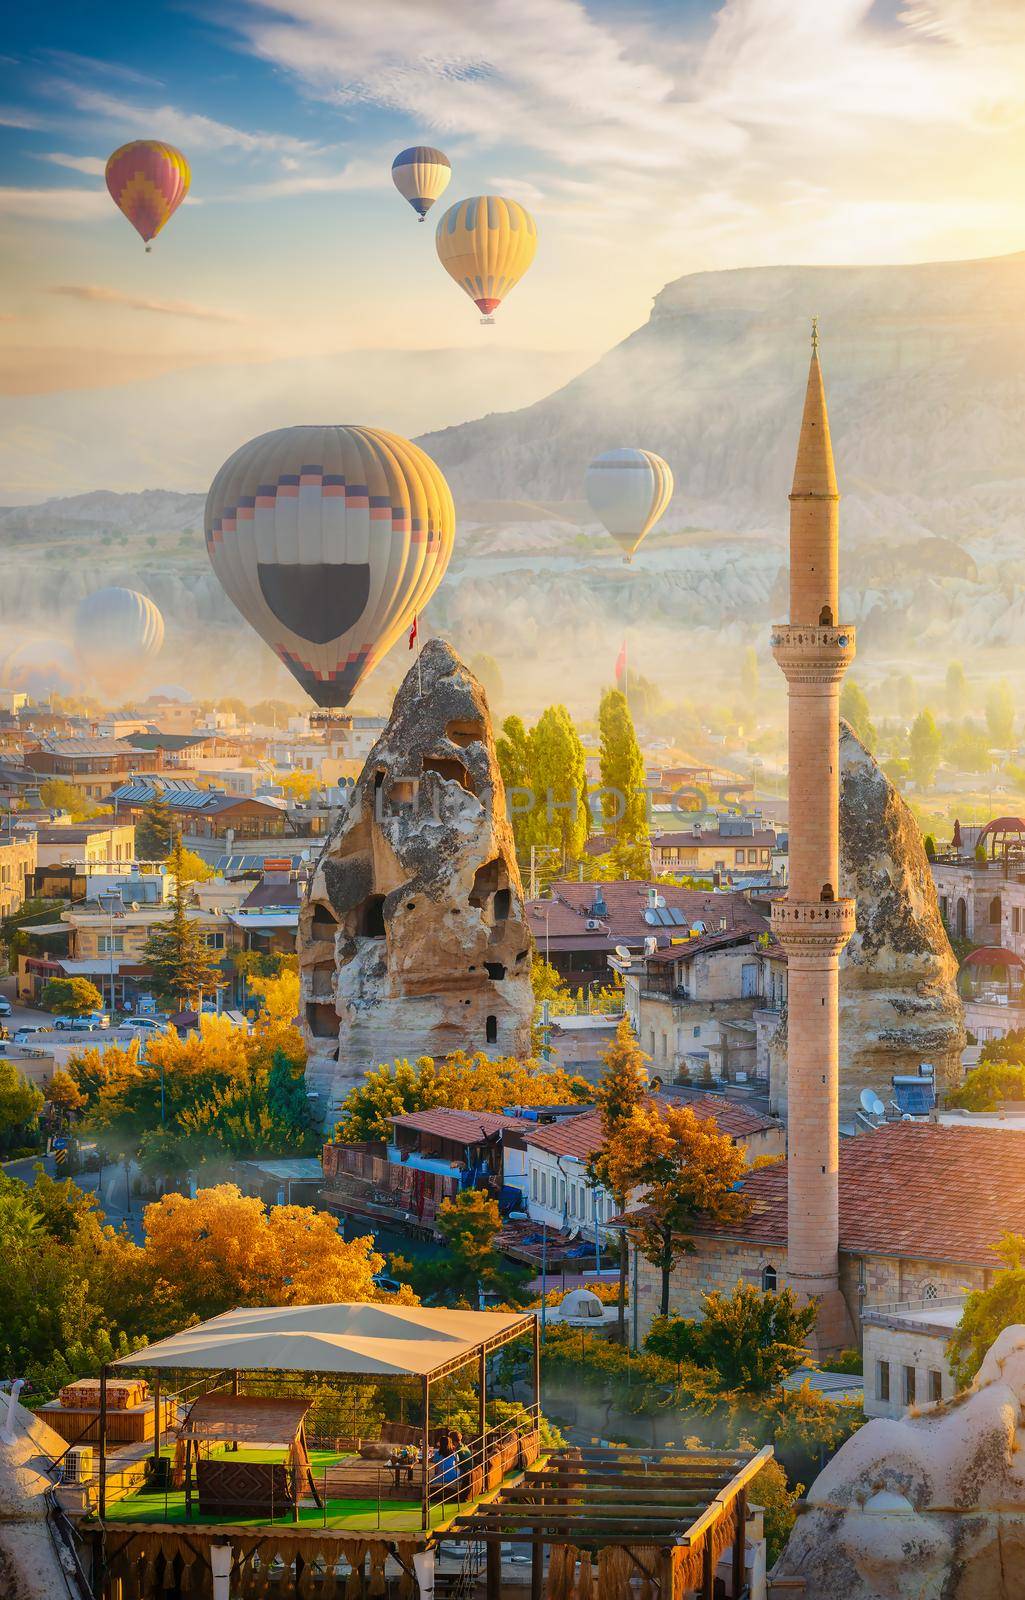 Mosque and air balloons in Goreme, Turkey